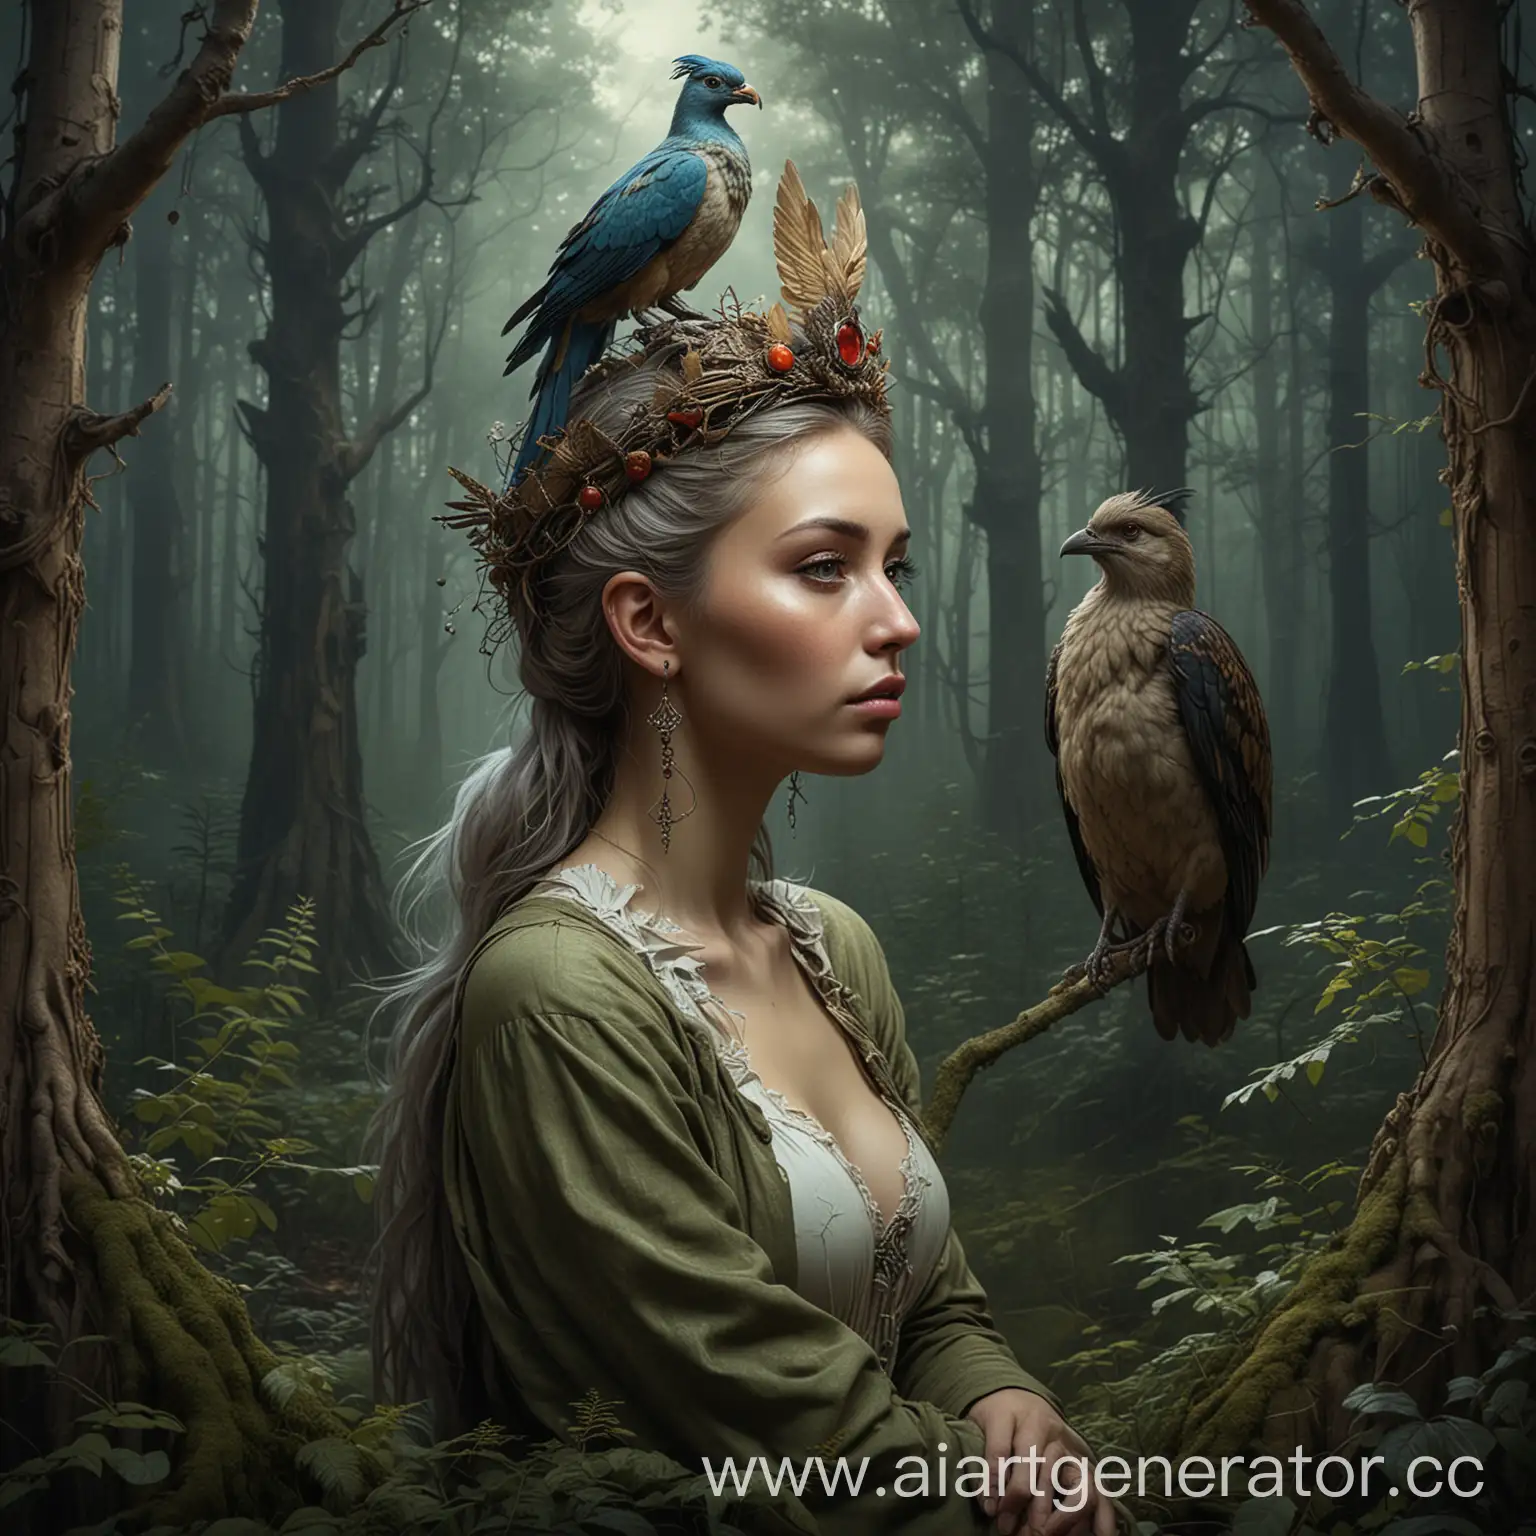 Enchanting-Sirin-Woman-Amidst-Eerie-Forest